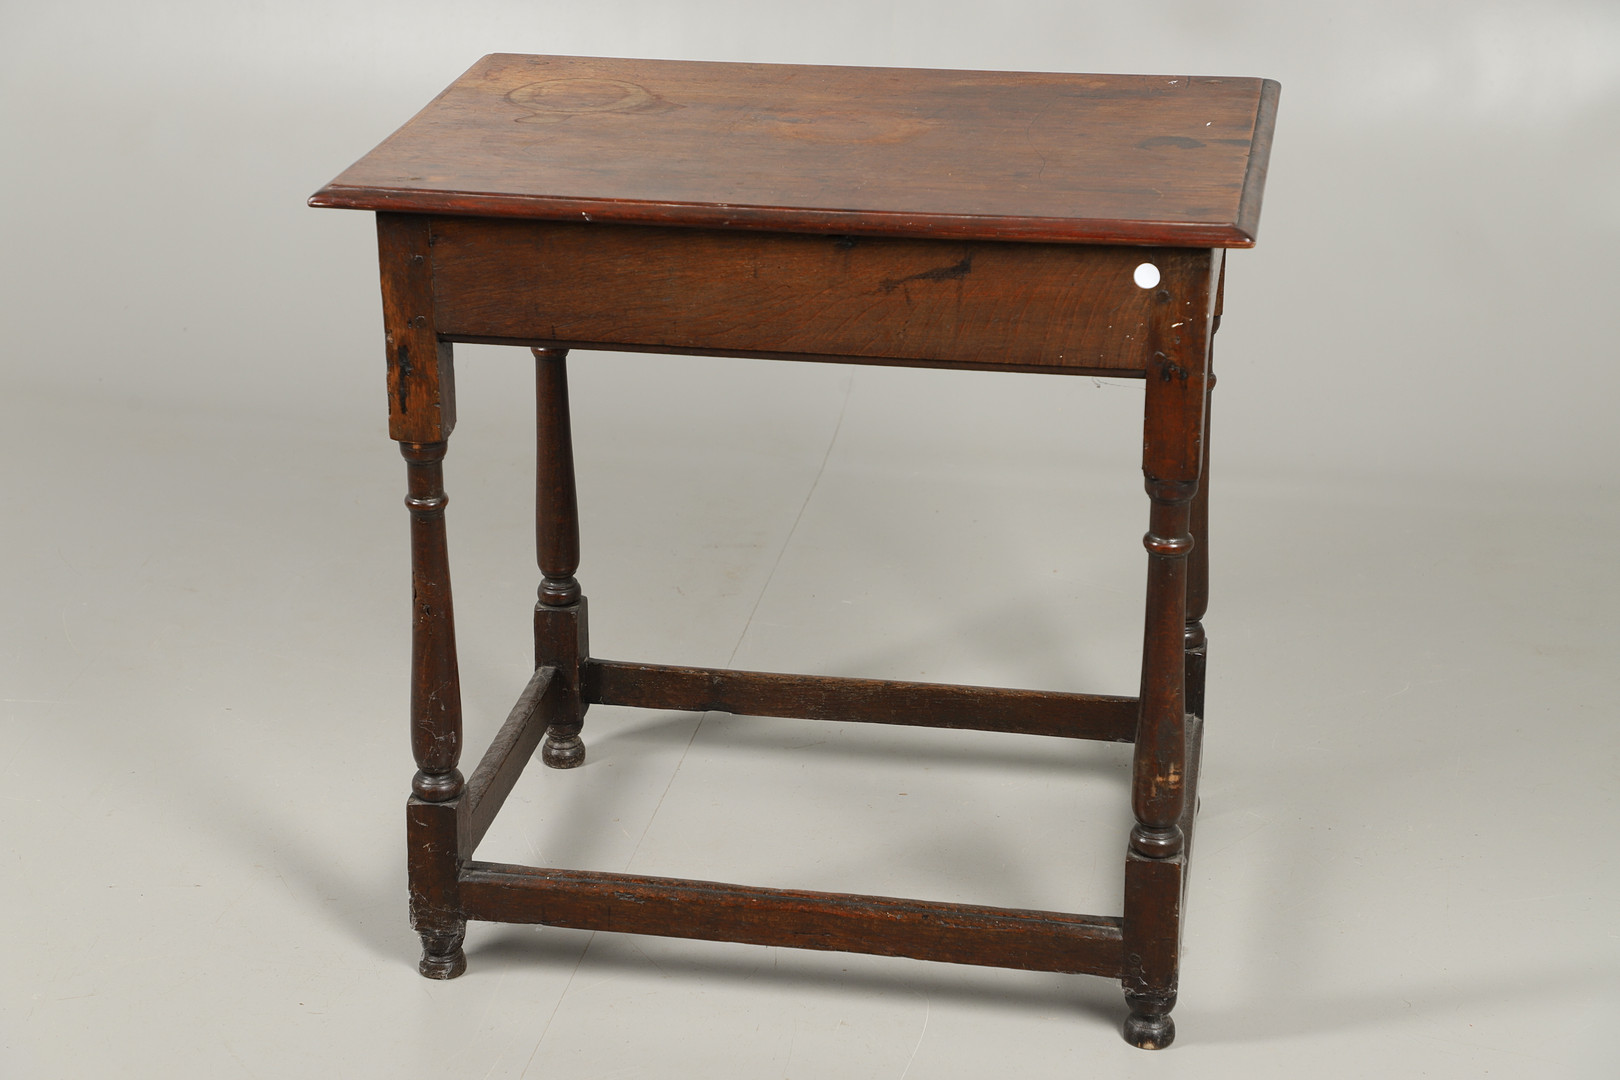 AN EARLY 19TH CENTURY OAK SIDE TABLE, CIRCA 1800. - Image 6 of 7